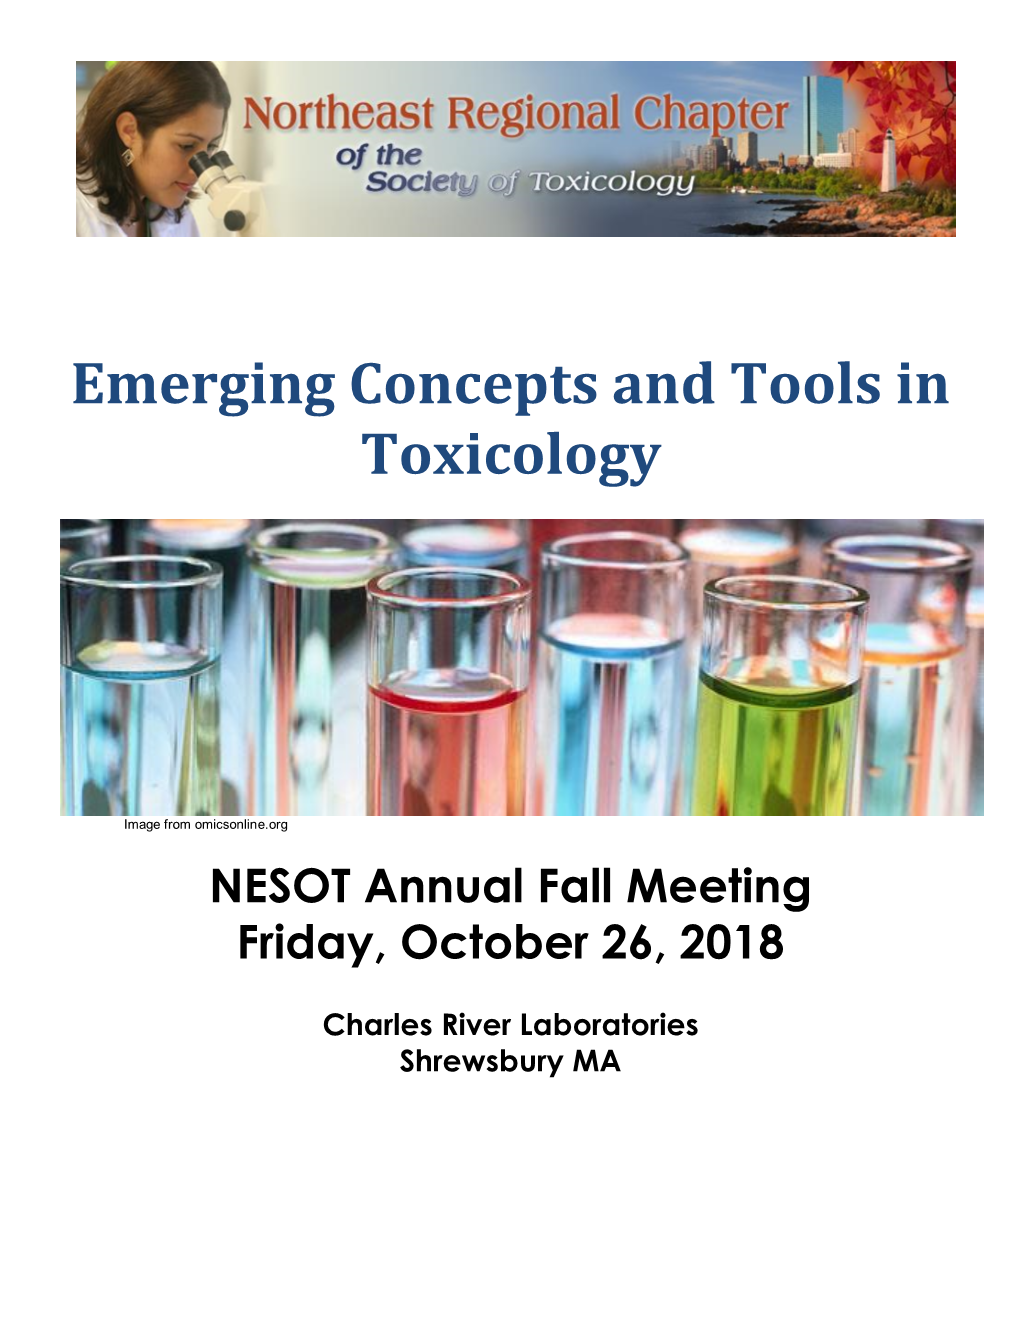 Emerging Concepts and Tools in Toxicology